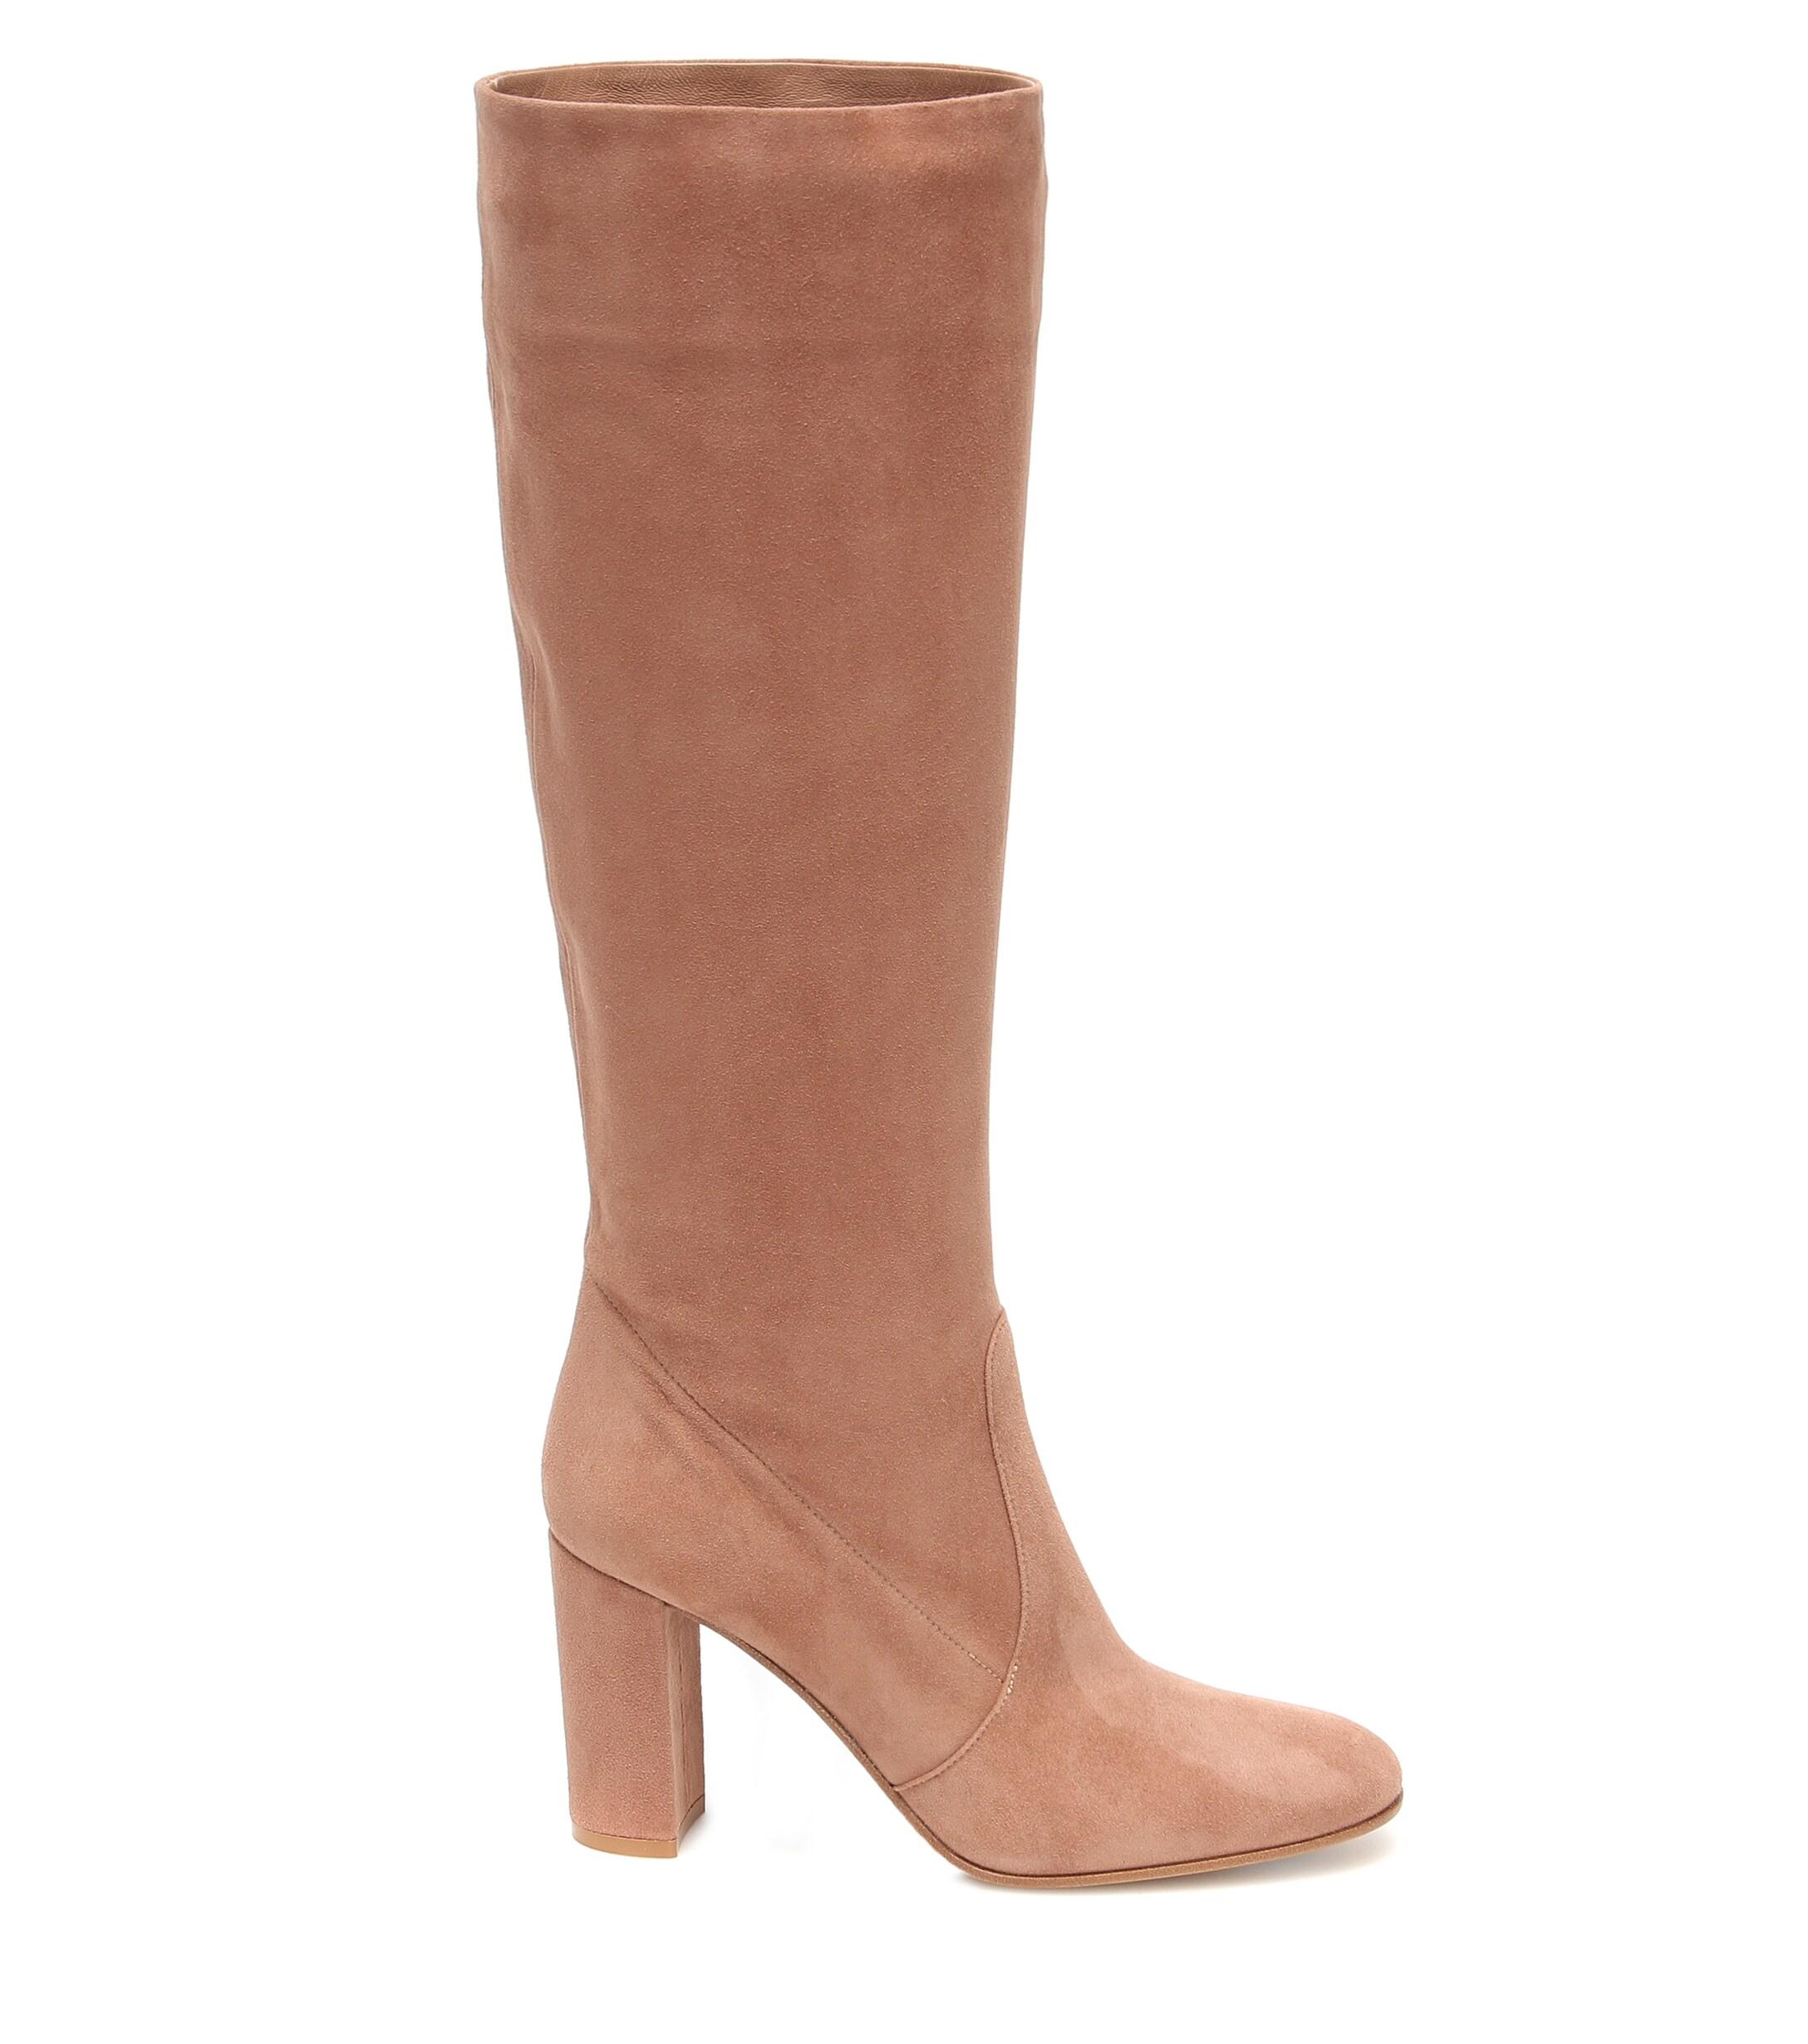 Gianvito Rossi Glen 85 Suede Knee-high Boots in Pink - Lyst